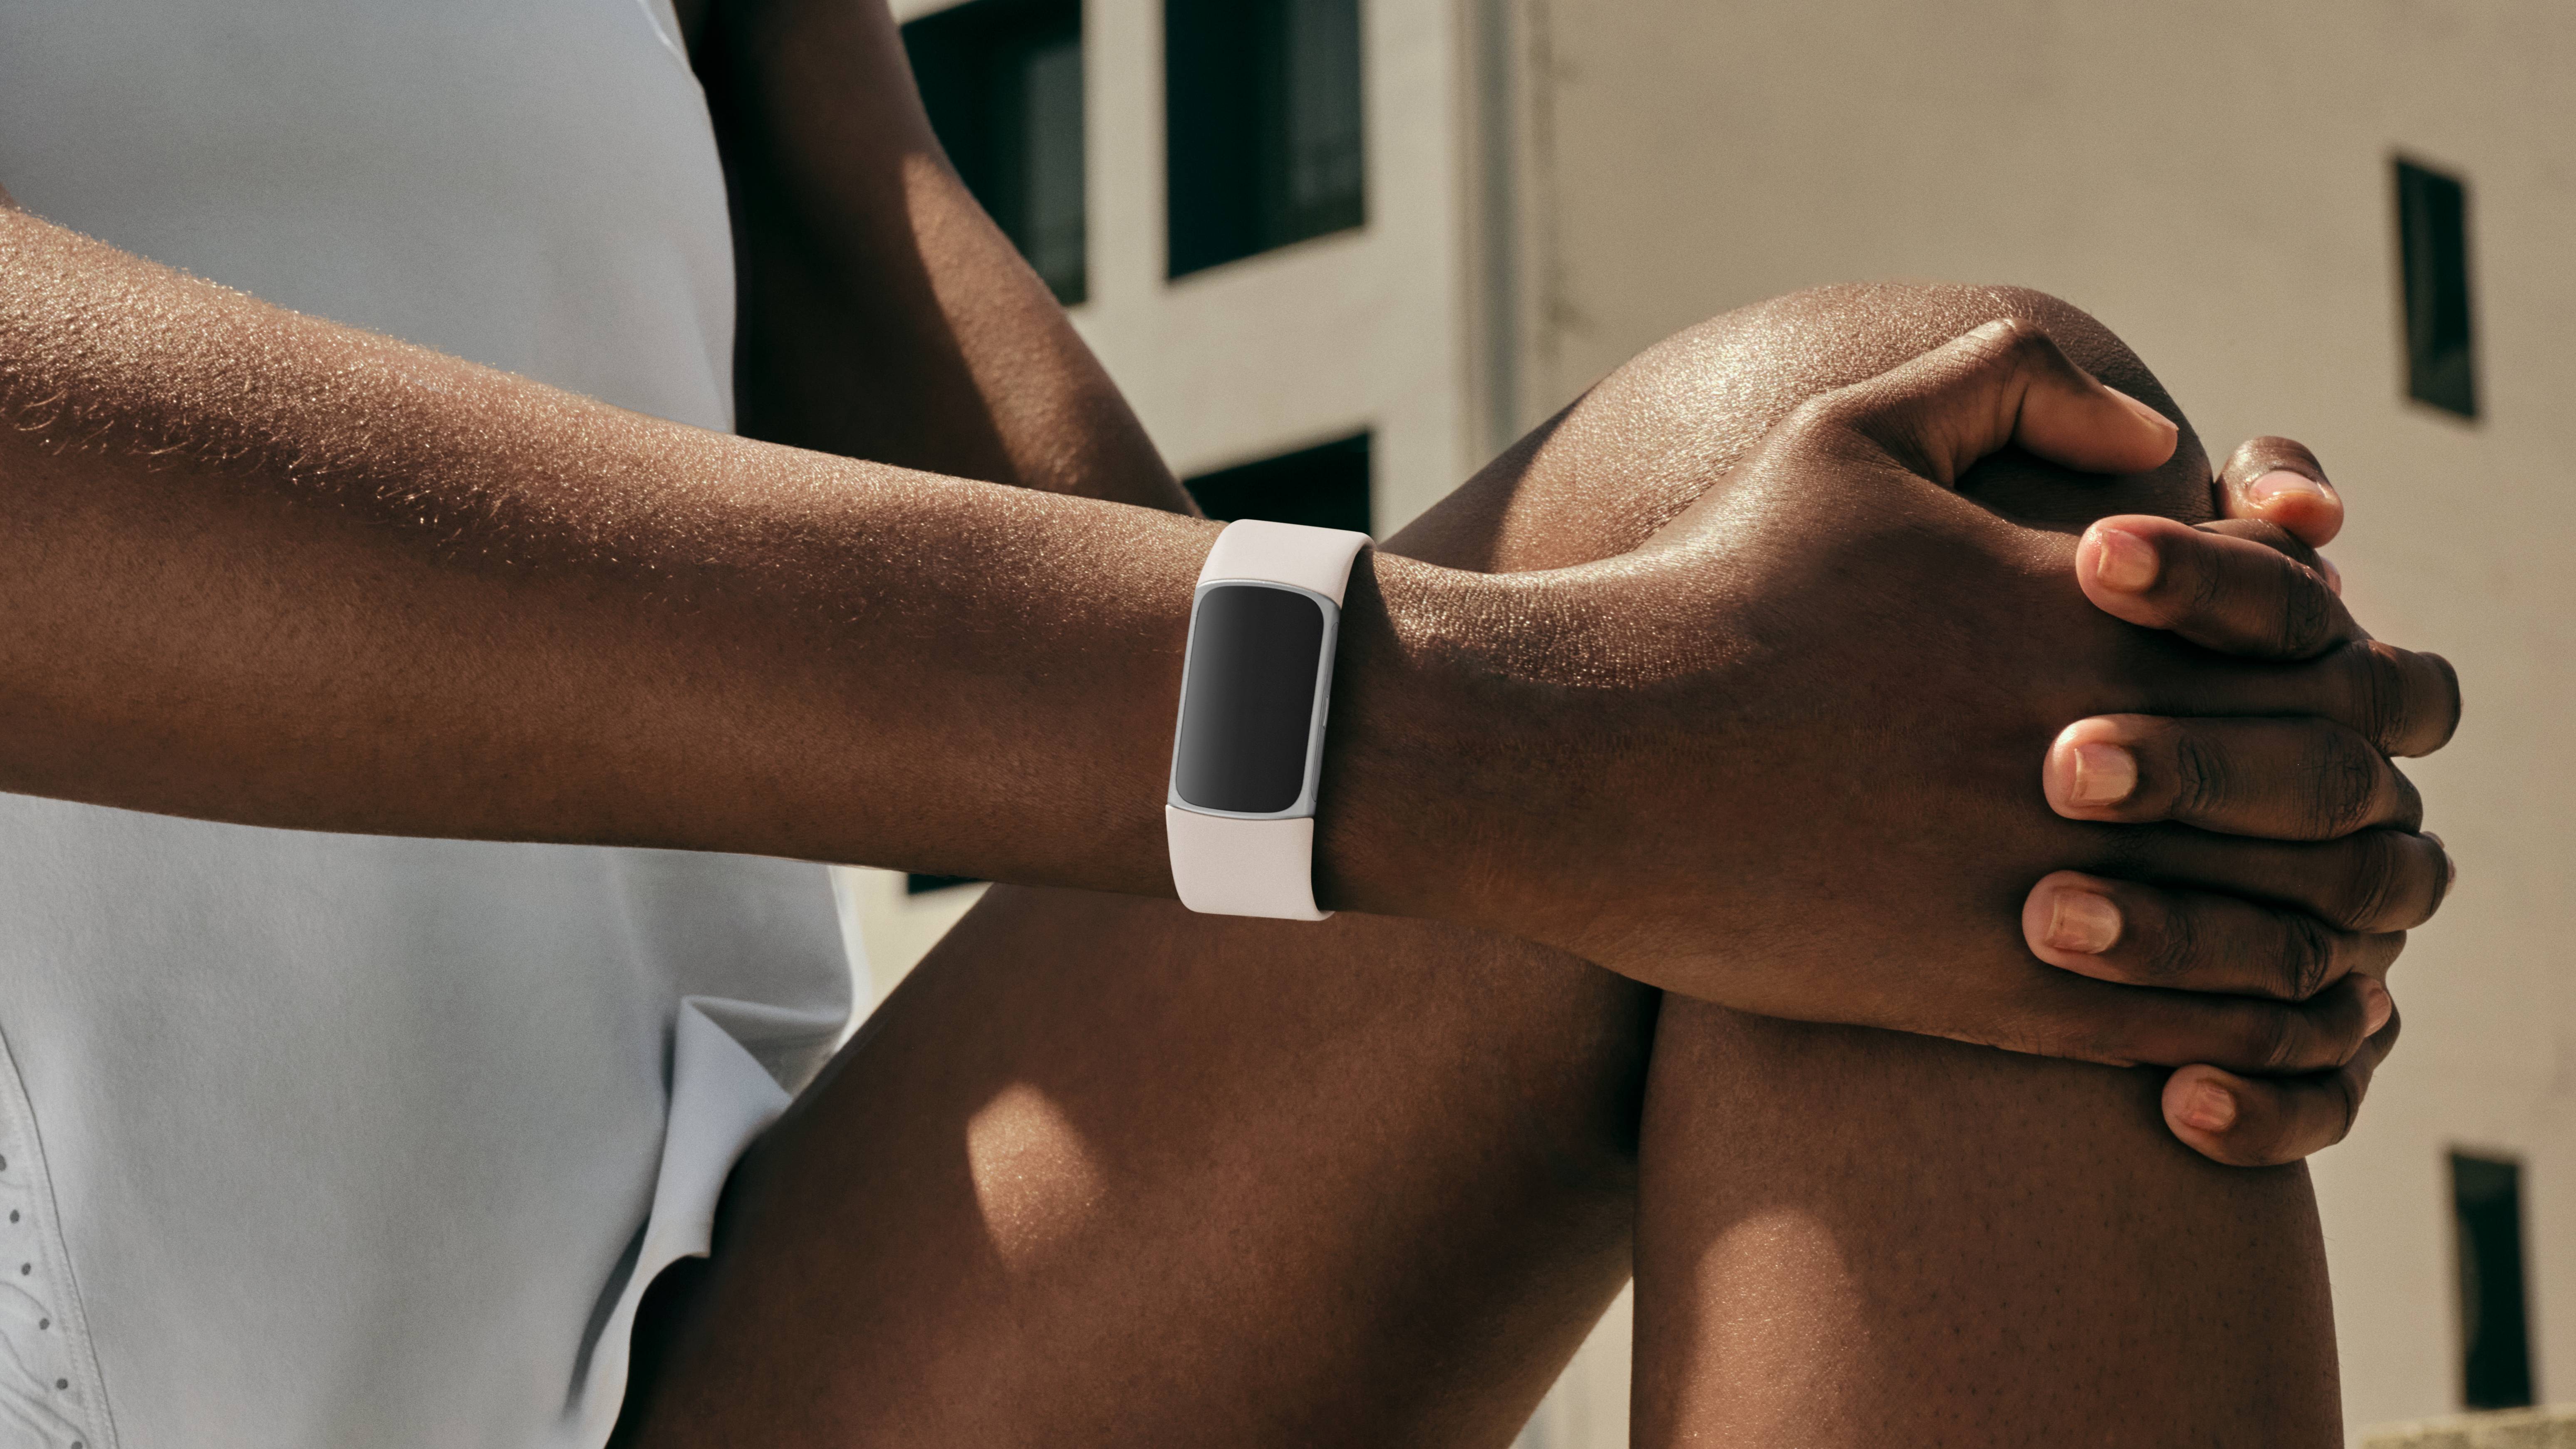 Fitbit Charge 6 is a Pixel Watch in a fitness tracker